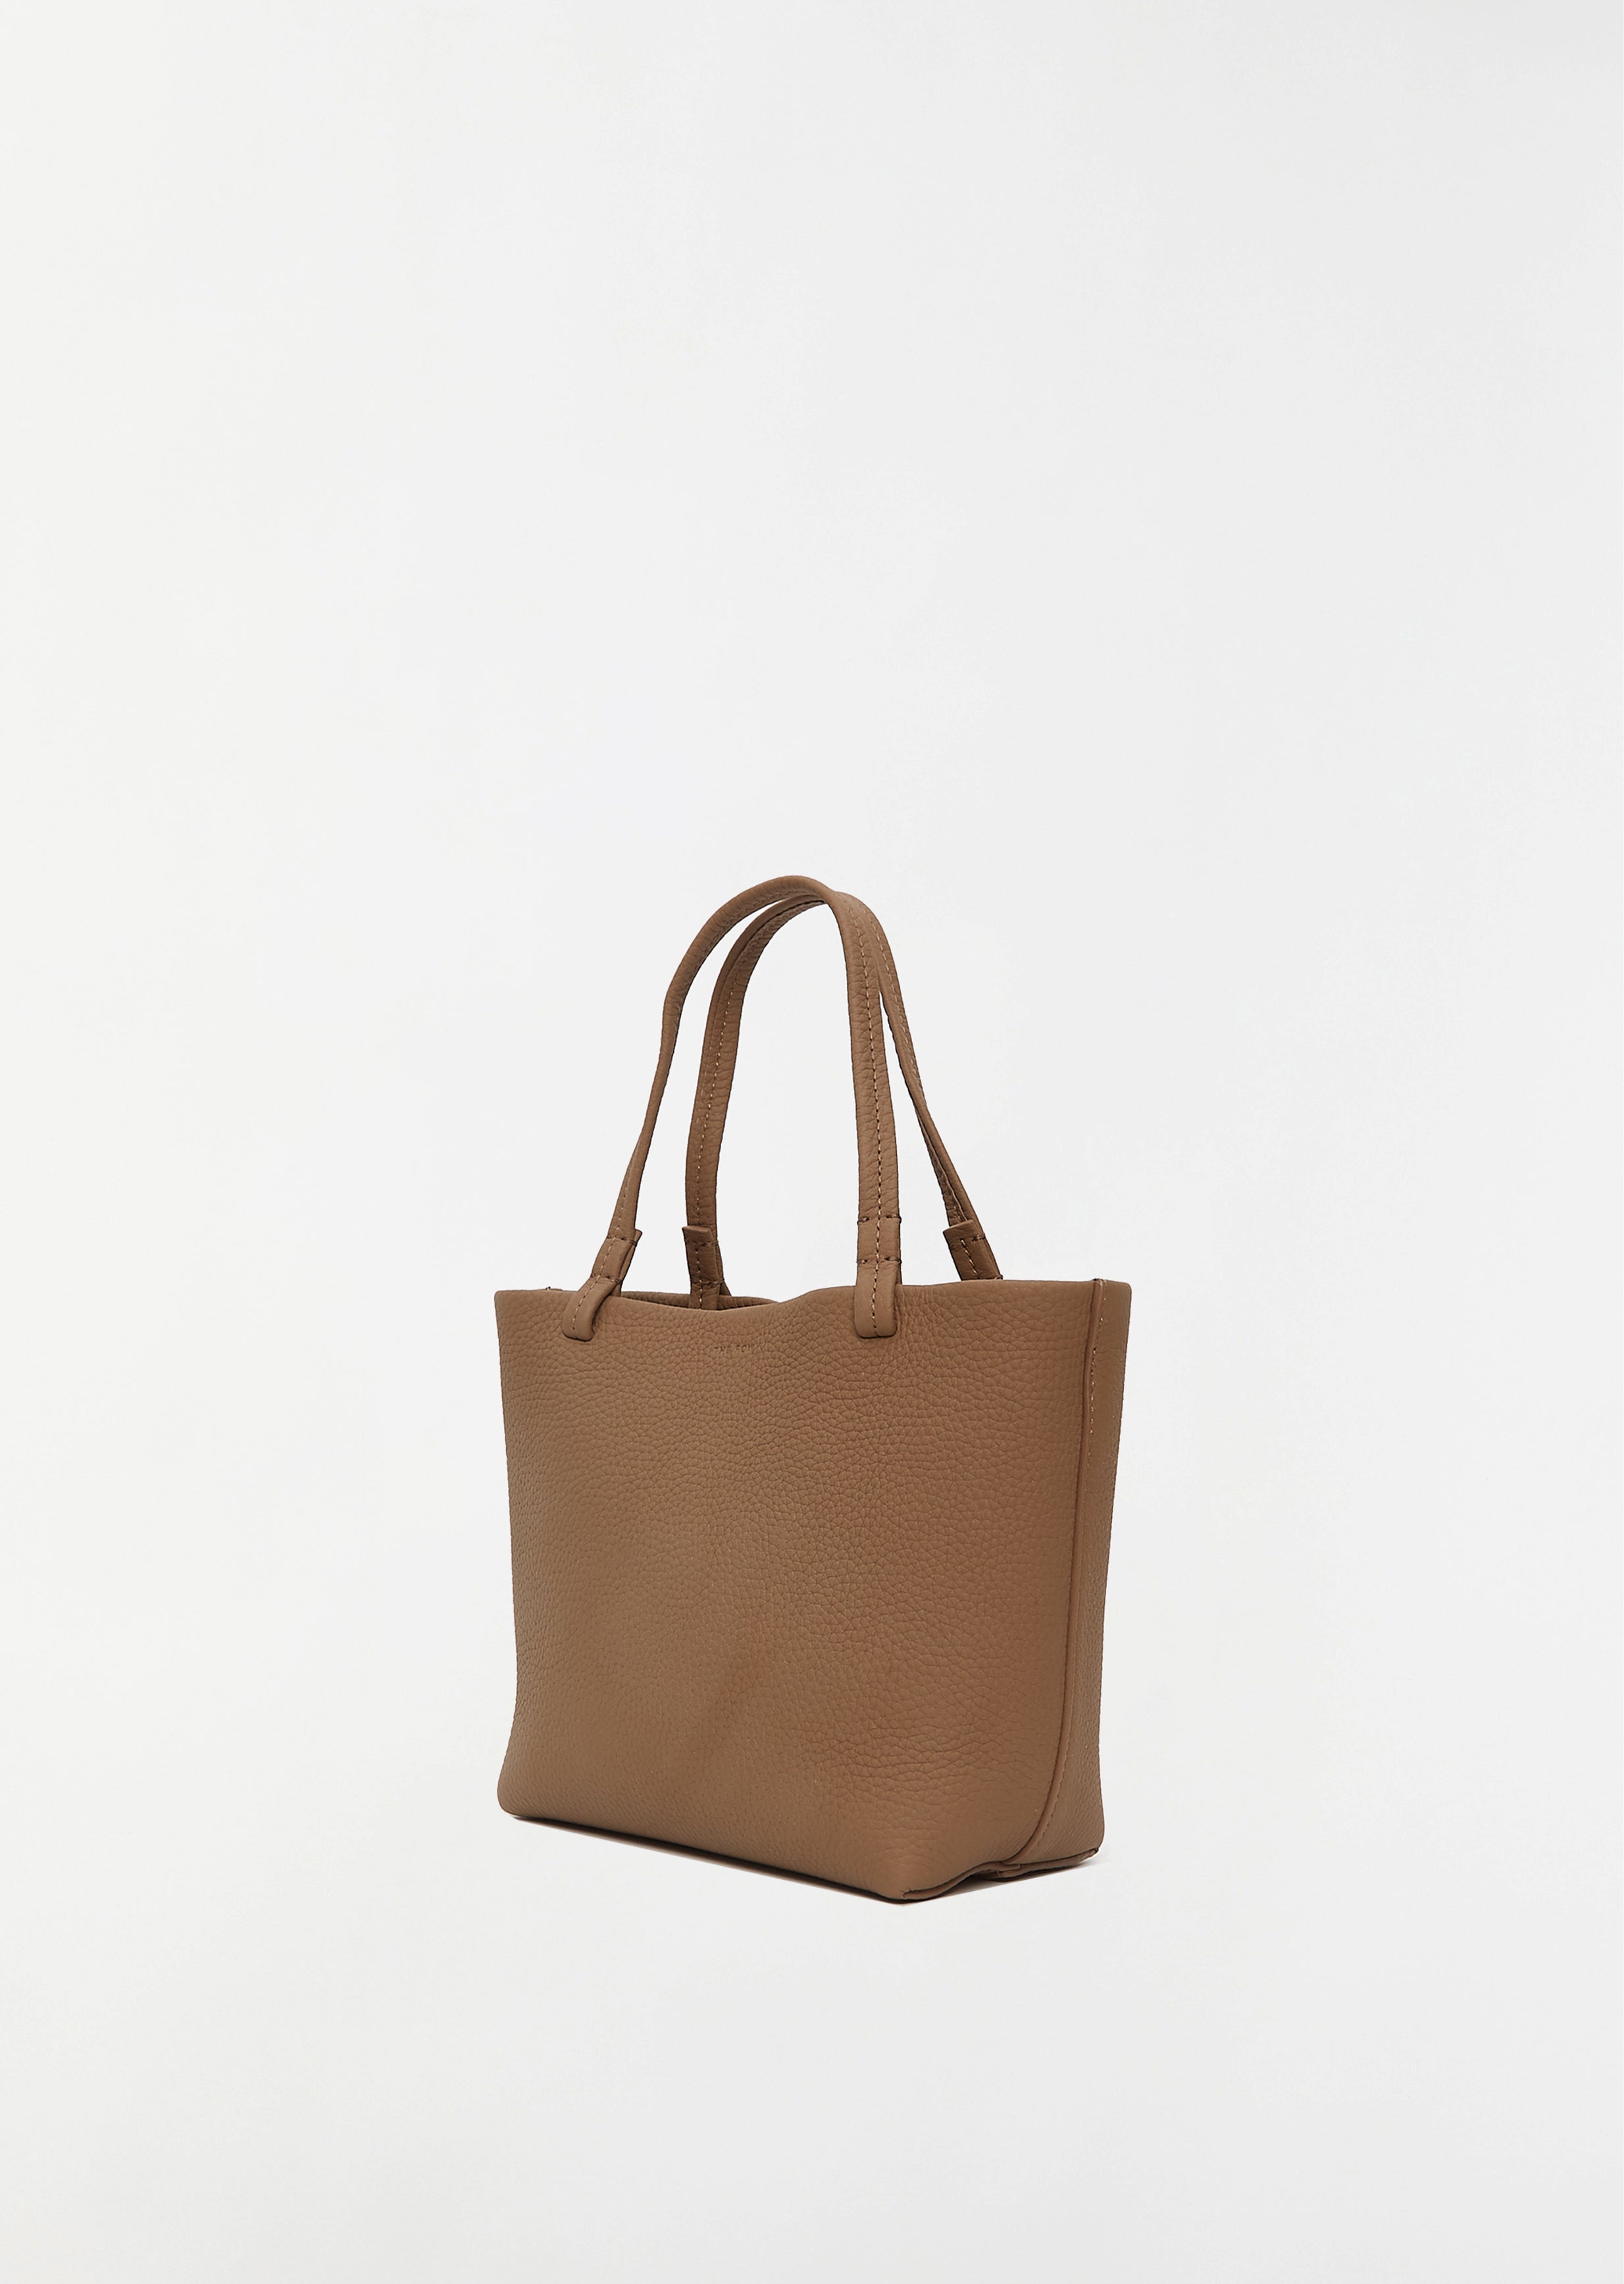 Beige Park small nubuck tote bag, The Row